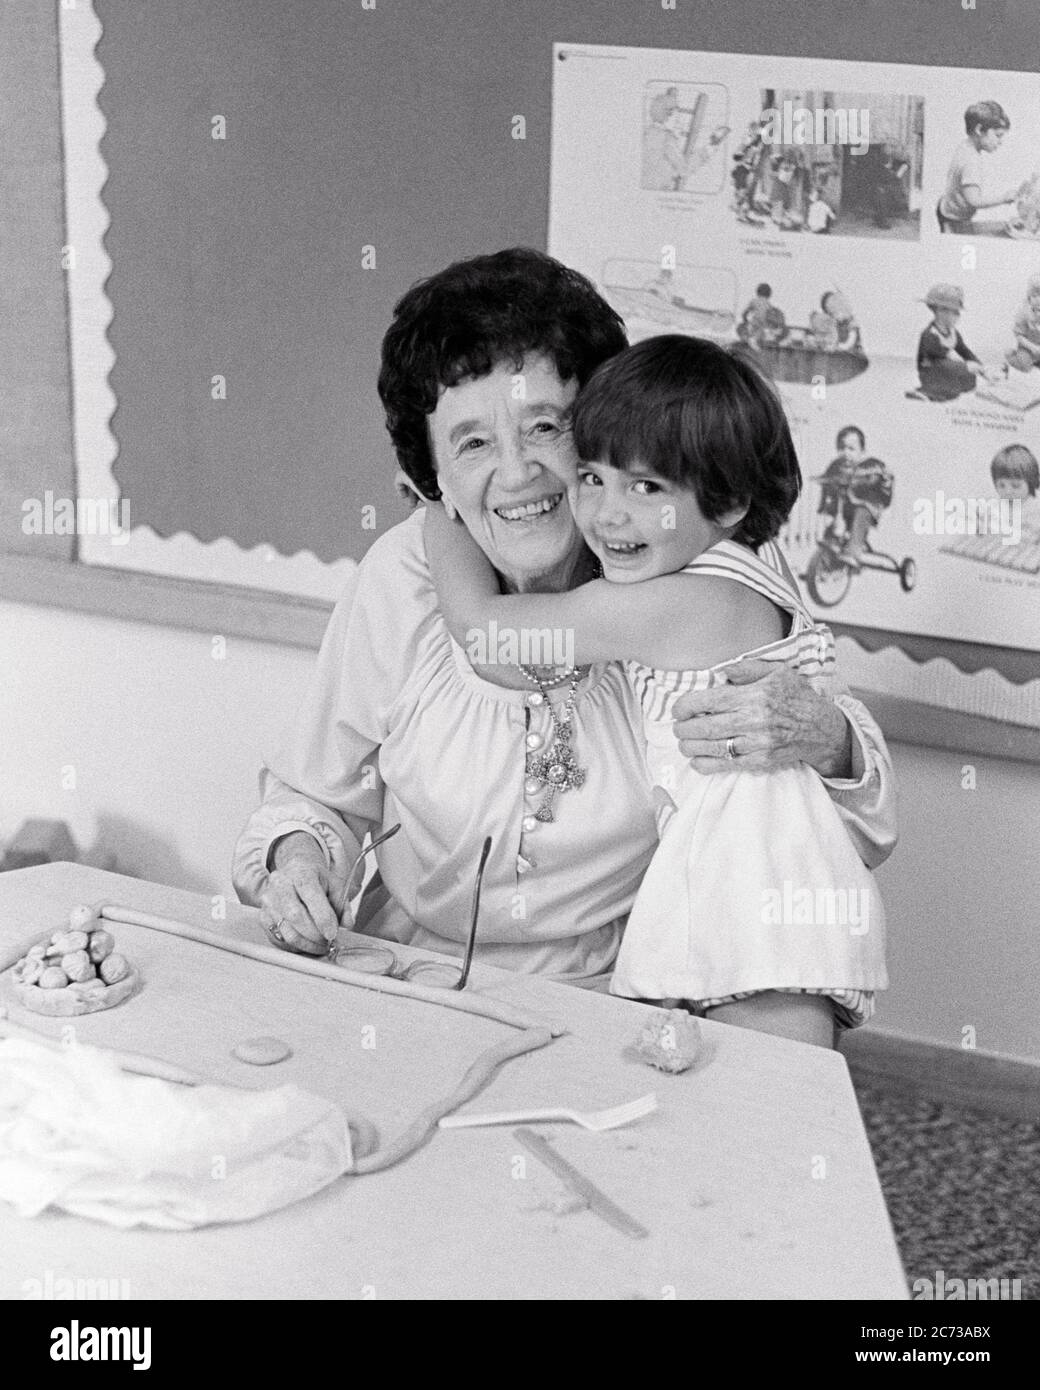 1970s 1980s LAUGHING LITTLE GIRL HUGGING SMILING KINDERGARTEN OR PRESCHOOL TEACHER SITTING IN CLASSROOM BOTH LOOKING AT CAMERA - s21726 HAR001 HARS BUSY FUTURE NOSTALGIA HUGGING OLD FASHION 1 JUVENILE FACIAL COMMUNICATION LAUGH BALANCE TEAMWORK EMBRACE PLEASED JOY LIFESTYLE CELEBRATION FEMALES COPY SPACE HALF-LENGTH HUG LADIES PERSONS INSPIRATION CARING SPIRITUALITY CONFIDENCE EMBRACING EXPRESSIONS MIDDLE-AGED B&W EYE CONTACT SUCCESS HAPPINESS KINDERGARTEN PRESCHOOL MIDDLE-AGED WOMAN WELLNESS CHEERFUL ADVENTURE BOTH STRENGTH EXCITEMENT POWERFUL PRIDE IN AUTHORITY OCCUPATIONS CONNECTION Stock Photo